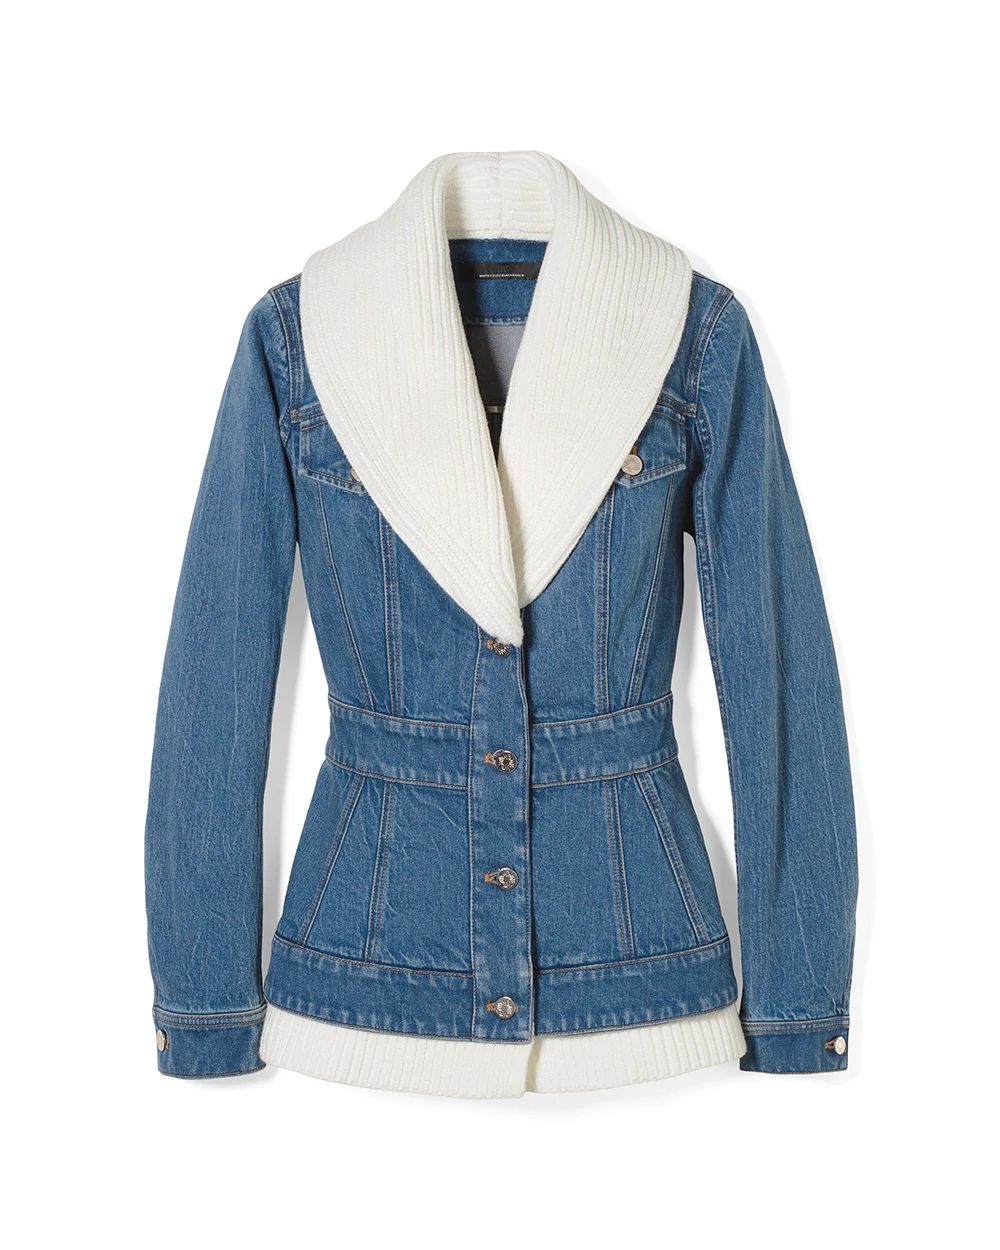 Peplum Denim Jacket with Sweater Trim click to view larger image.